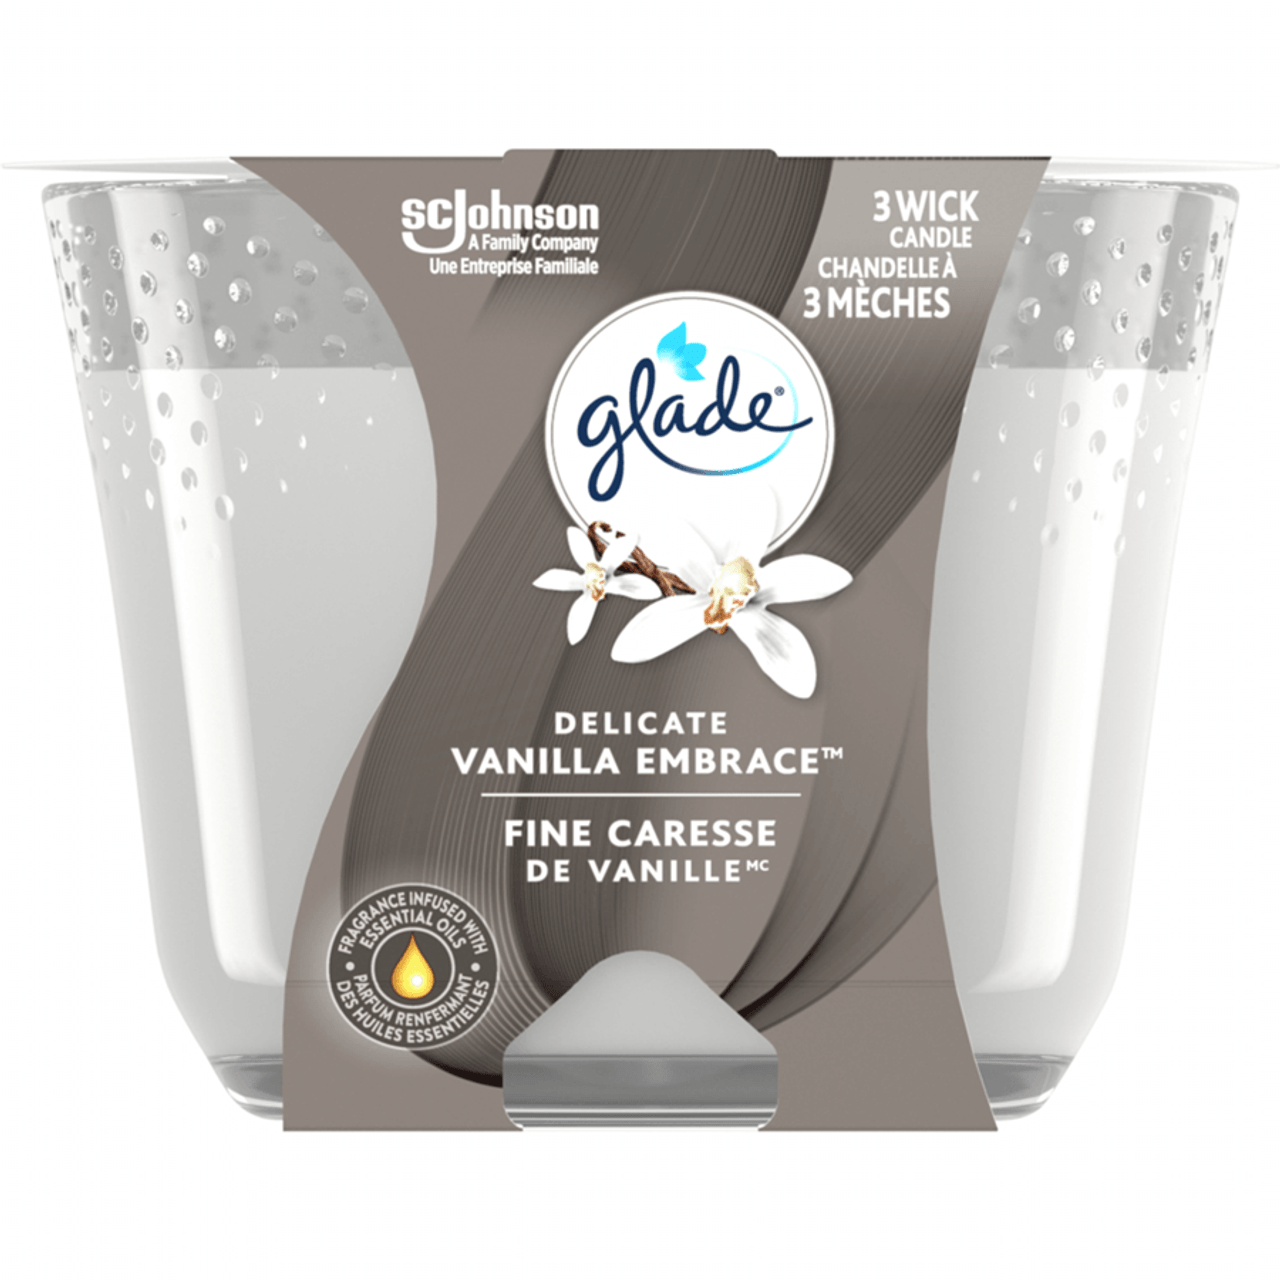 Glade Scented Vanilla Embrace Candle Delicate 3-Wick Candle 1 Count(4/Case)-Chicken Pieces